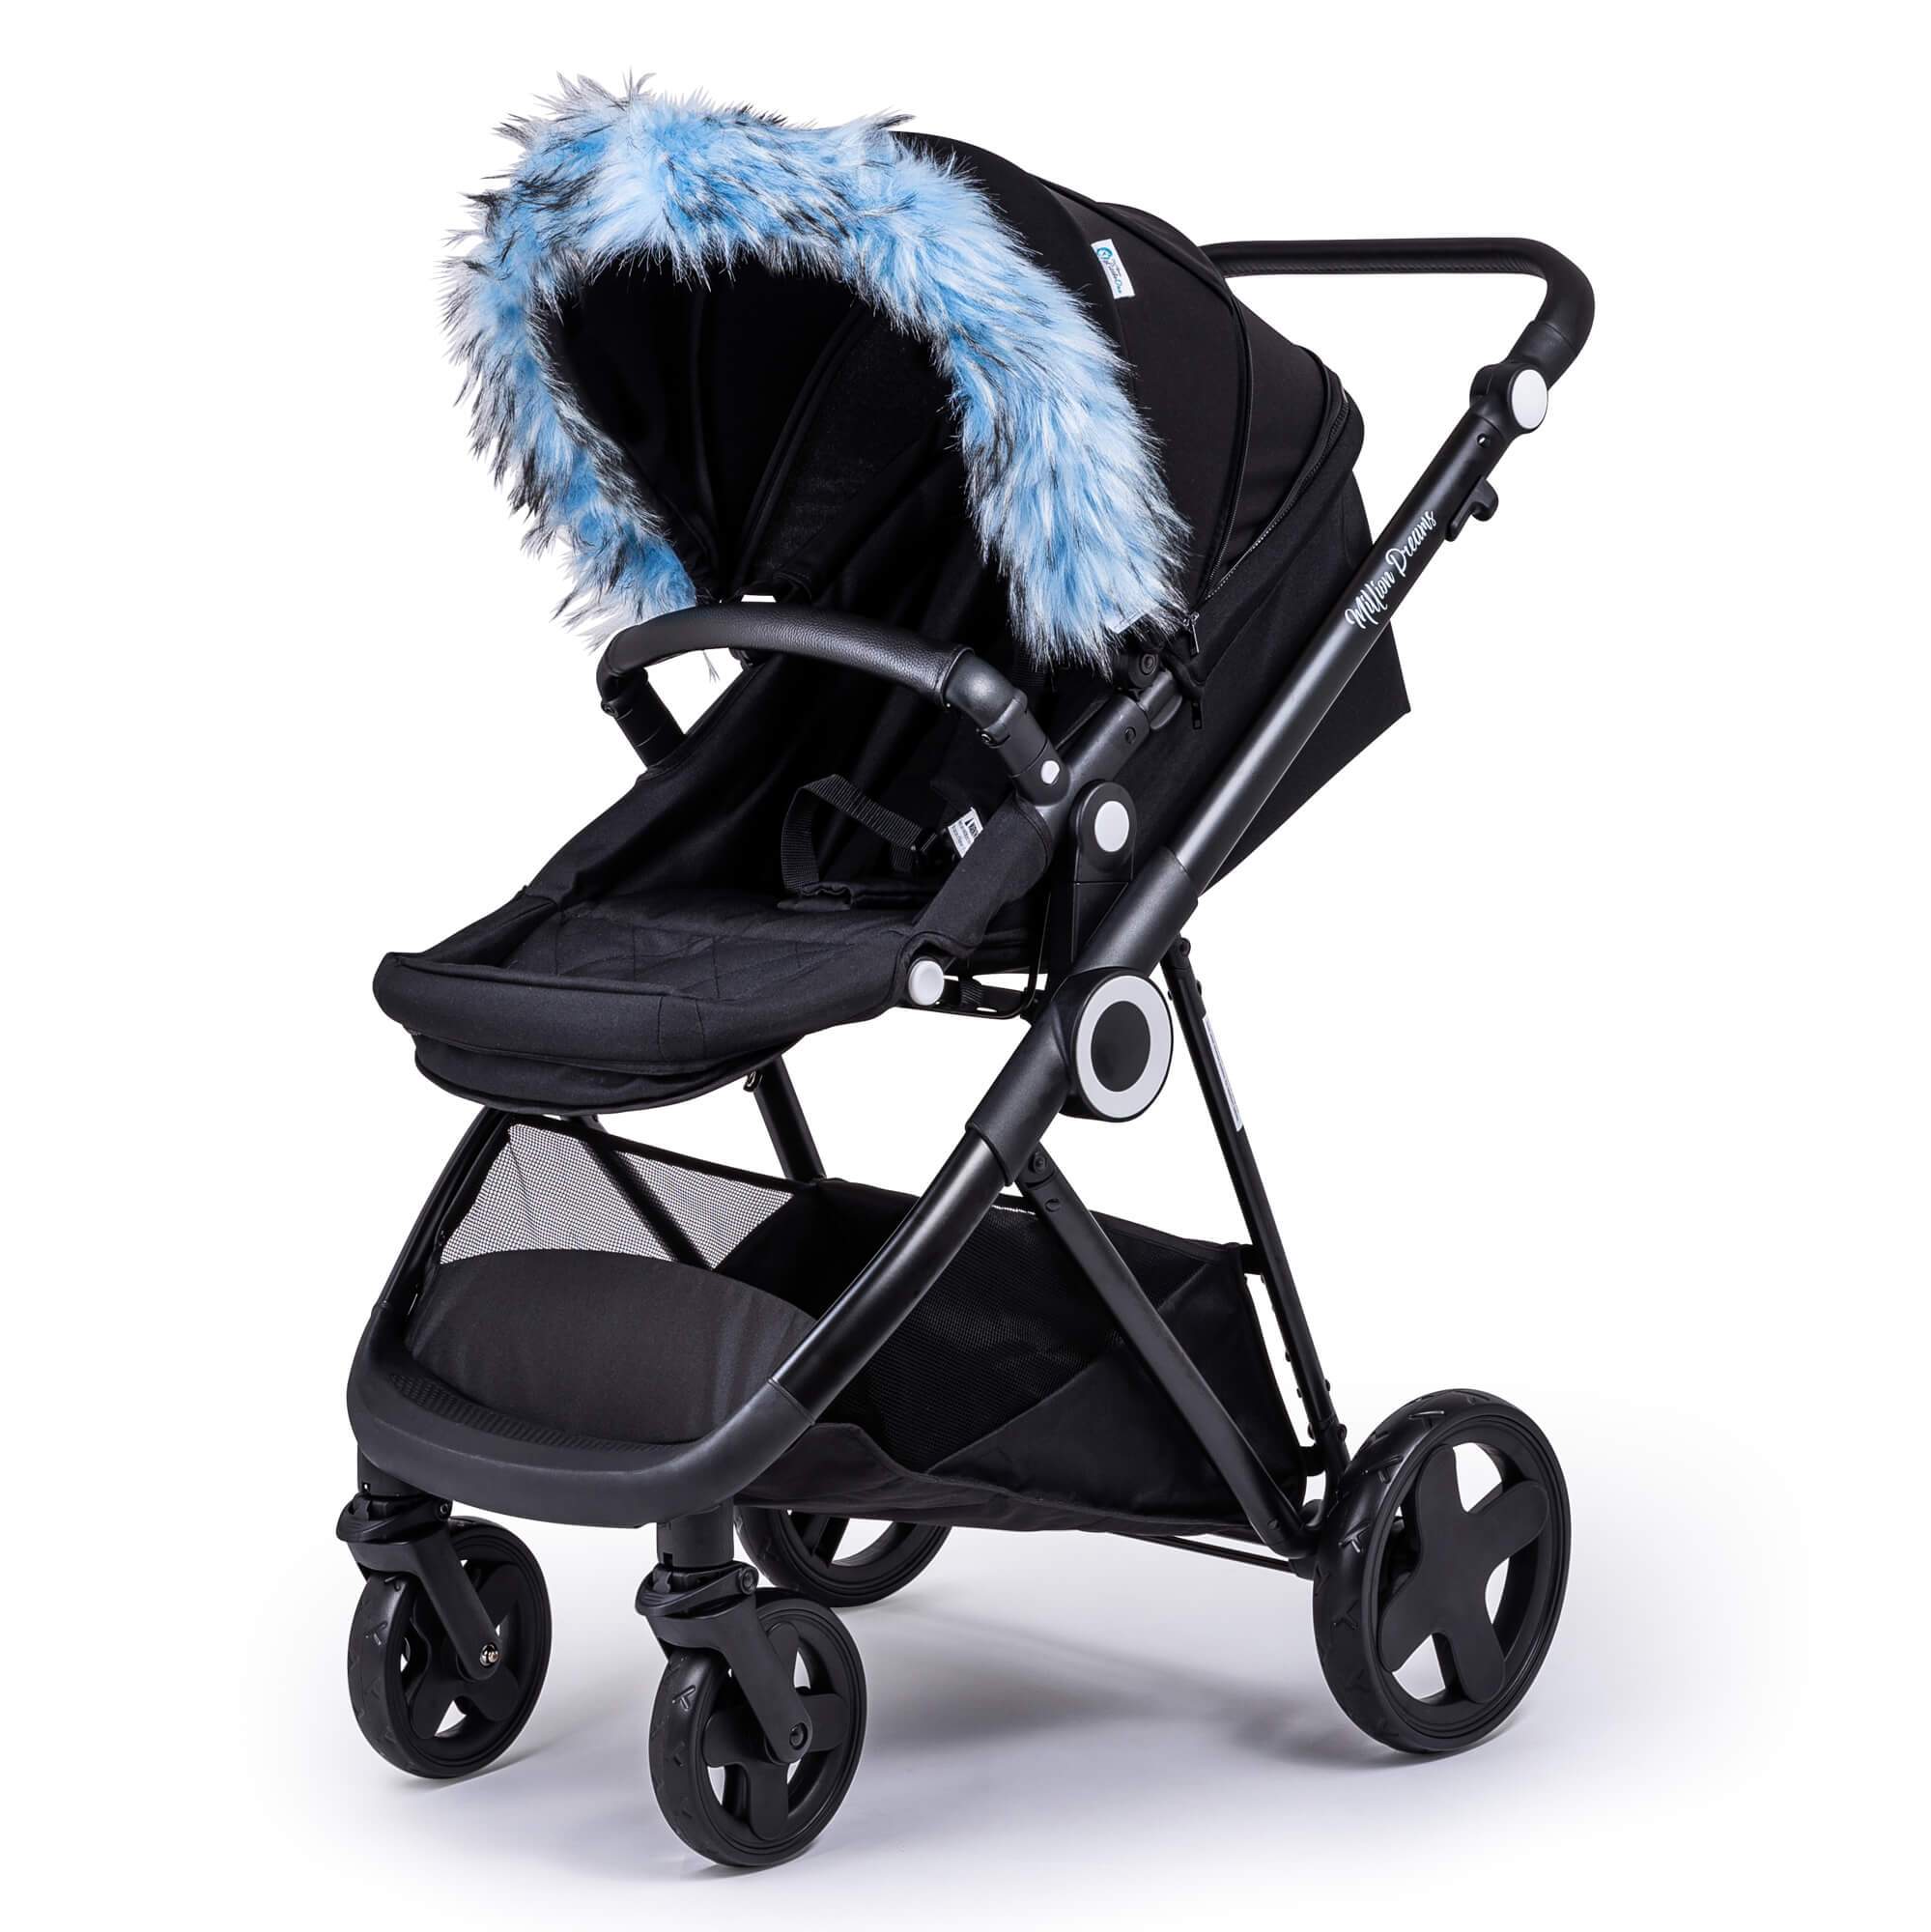 Pram Fur Hood Trim Attachment for Pushchair Compatible with My Babiie - Light Blue / Fits All Models | For Your Little One